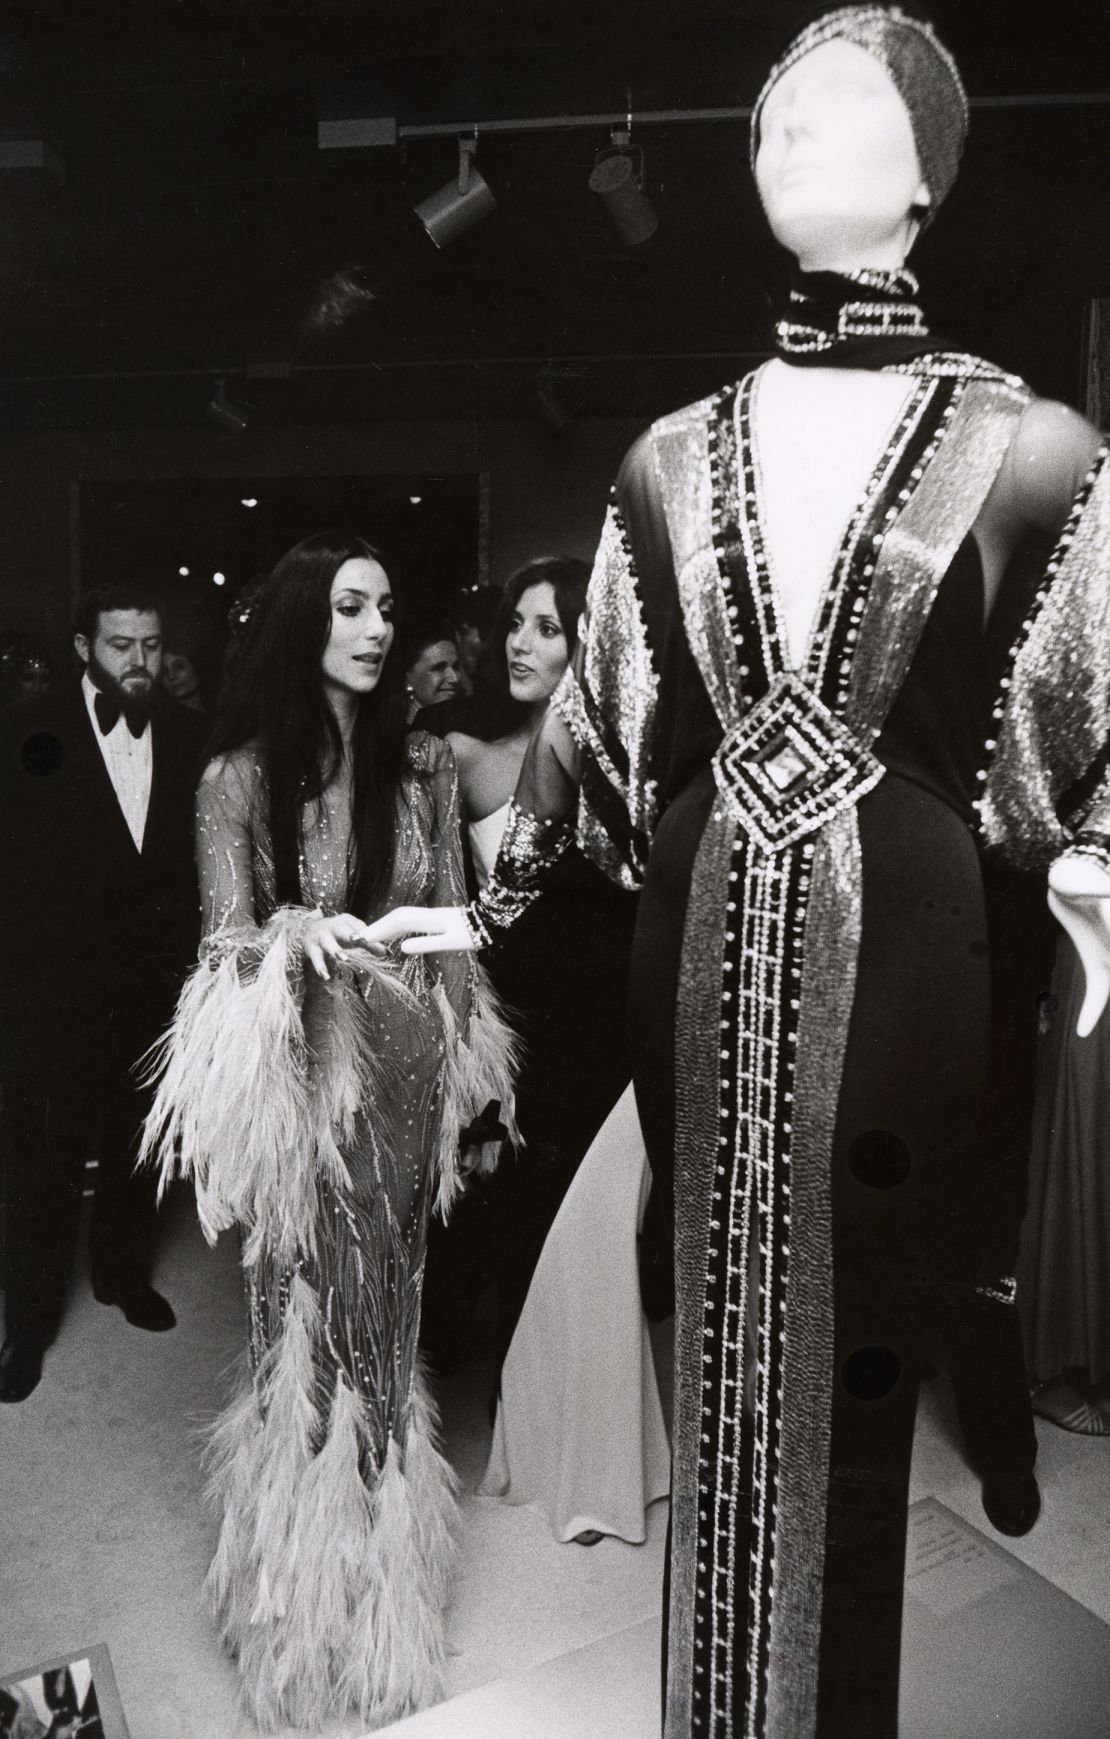 Cher attended the 'Romantic and Glamorous Hollywood Design' Met Gala in 1974. (Photo by Ron Galella/Ron Galella Collection via Getty Images)